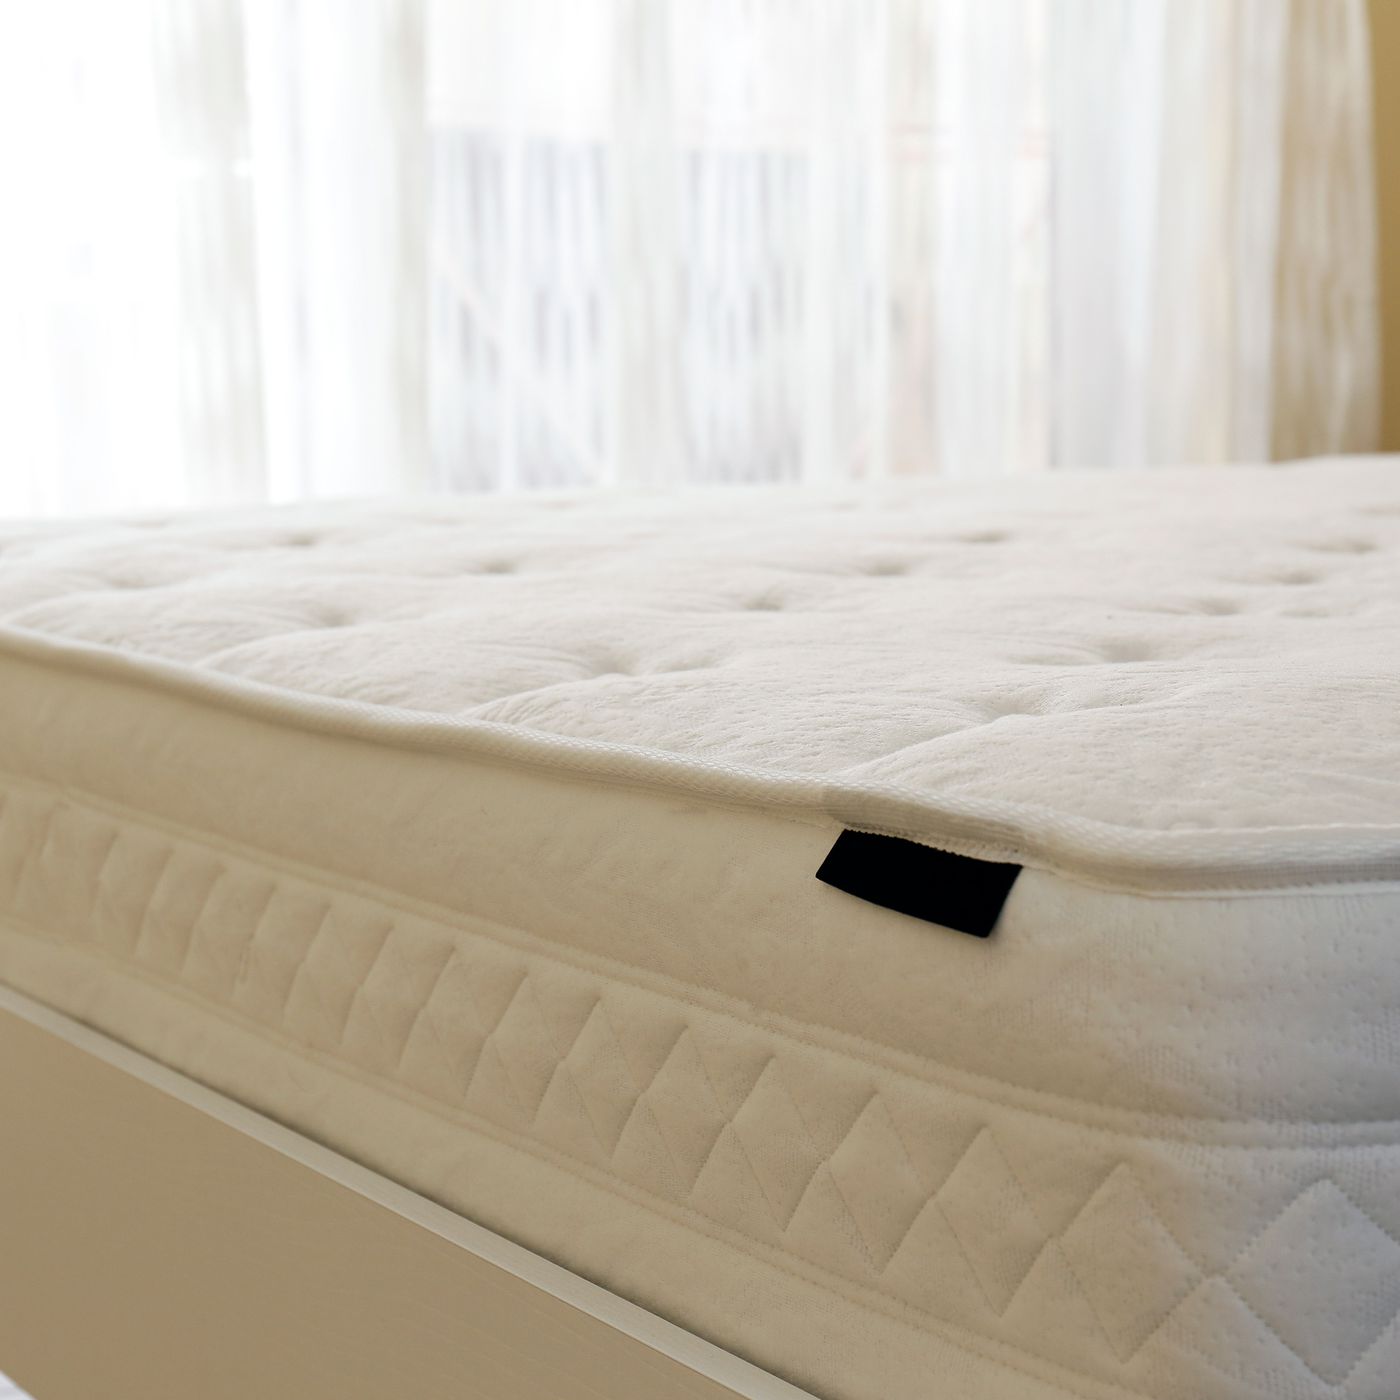 Steps To Get Rid Of Unsightly Stains From Your Mattress With Bleach